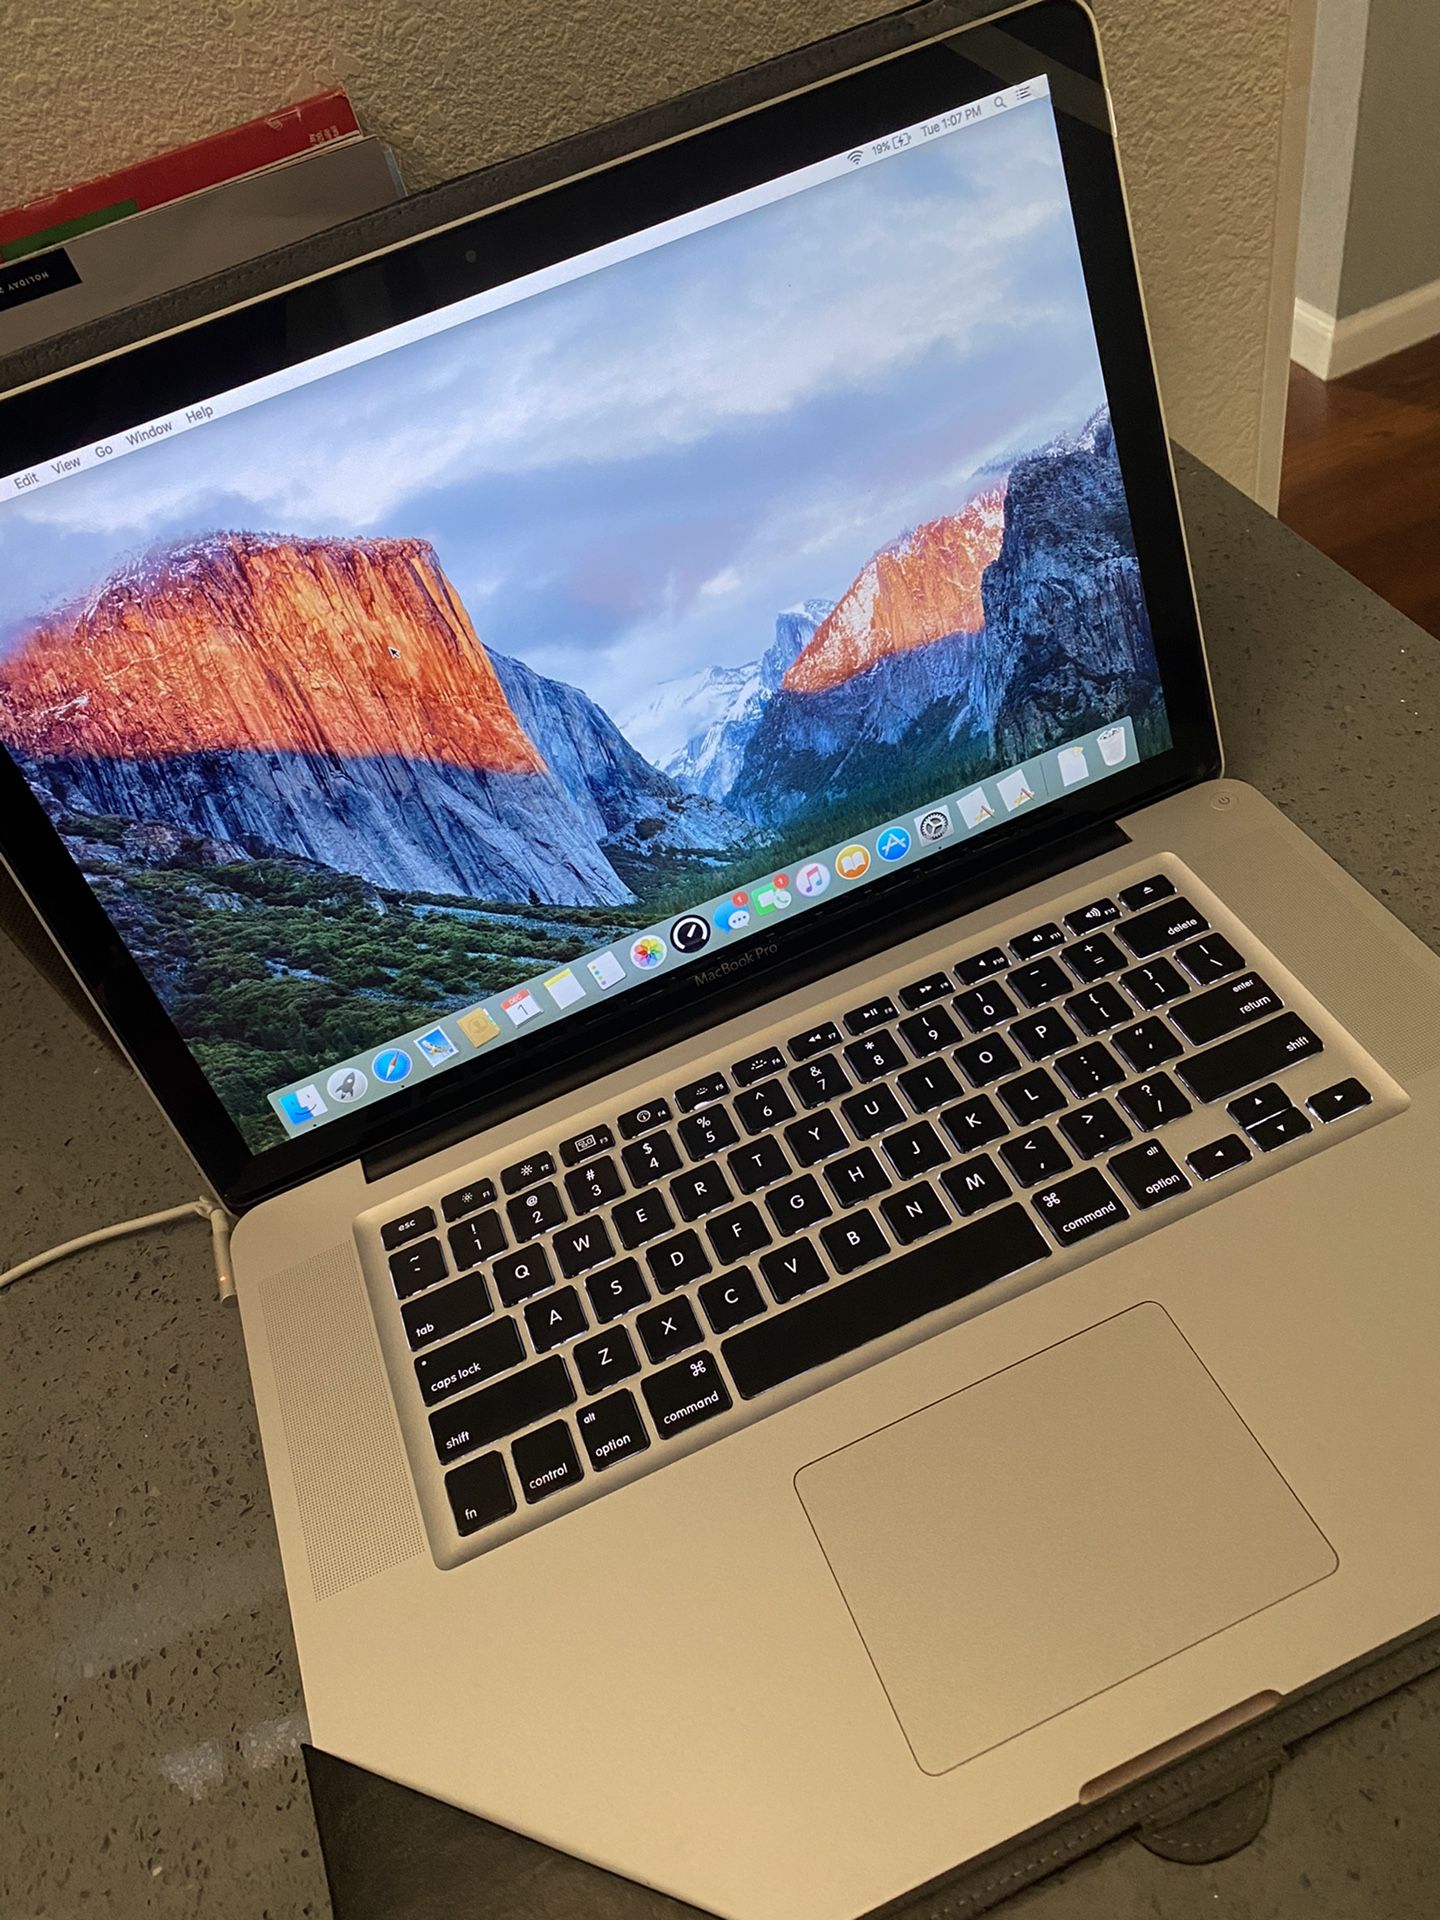 Apple MacBook Pro 15" Core i7 2.0 GHz Quad Core Early 2011 8GB 500GB HDD